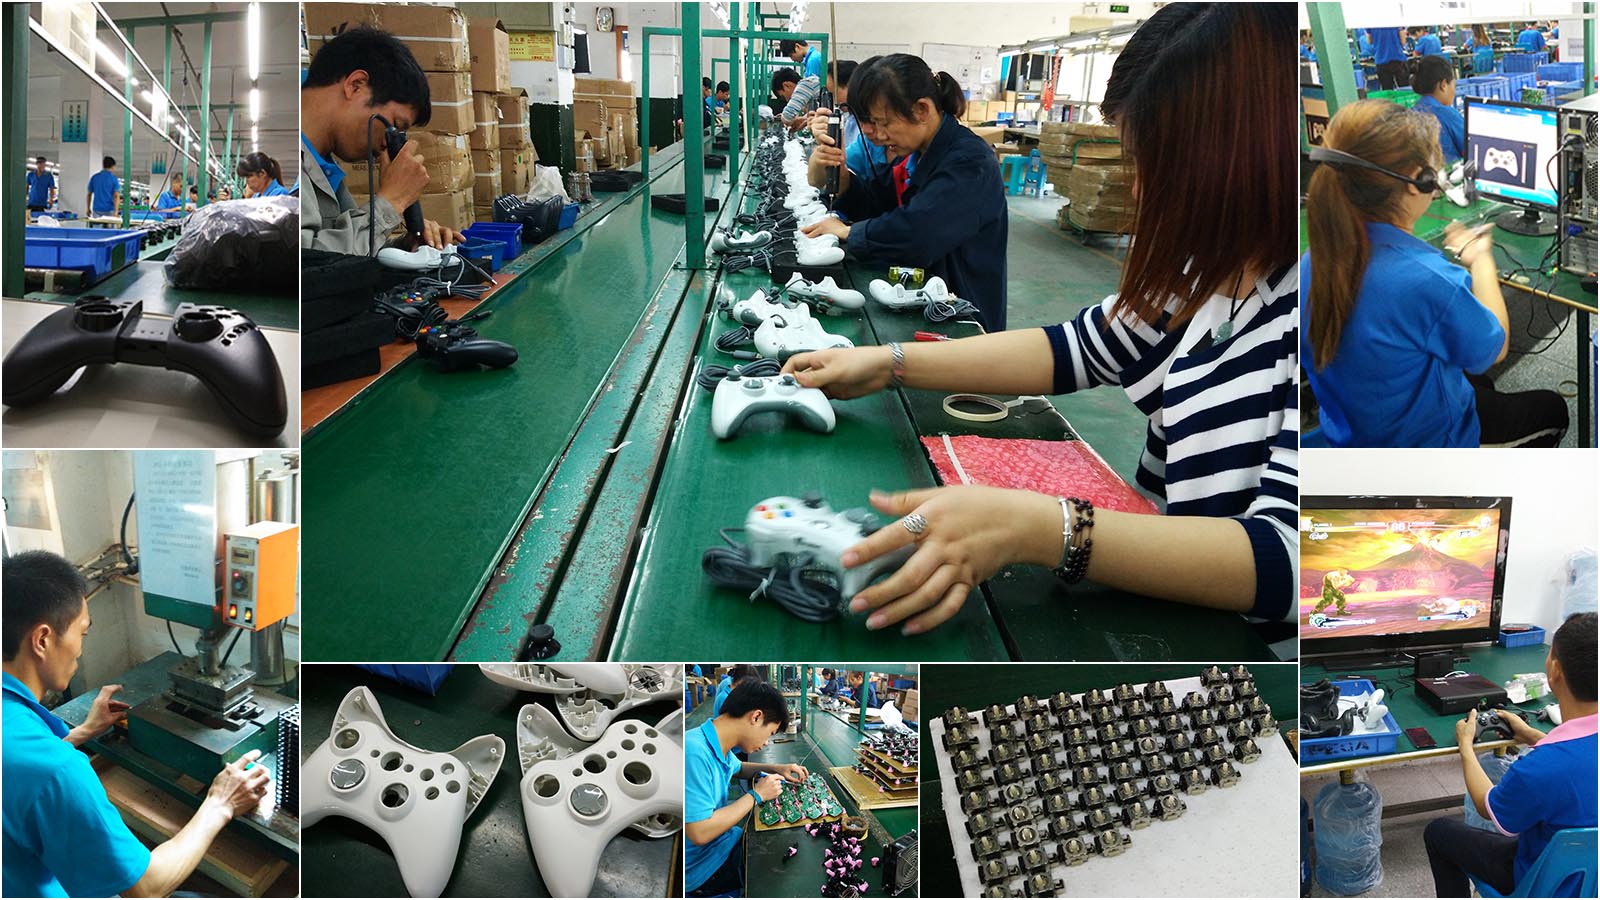 Dedication making high quality product manufacturing possible